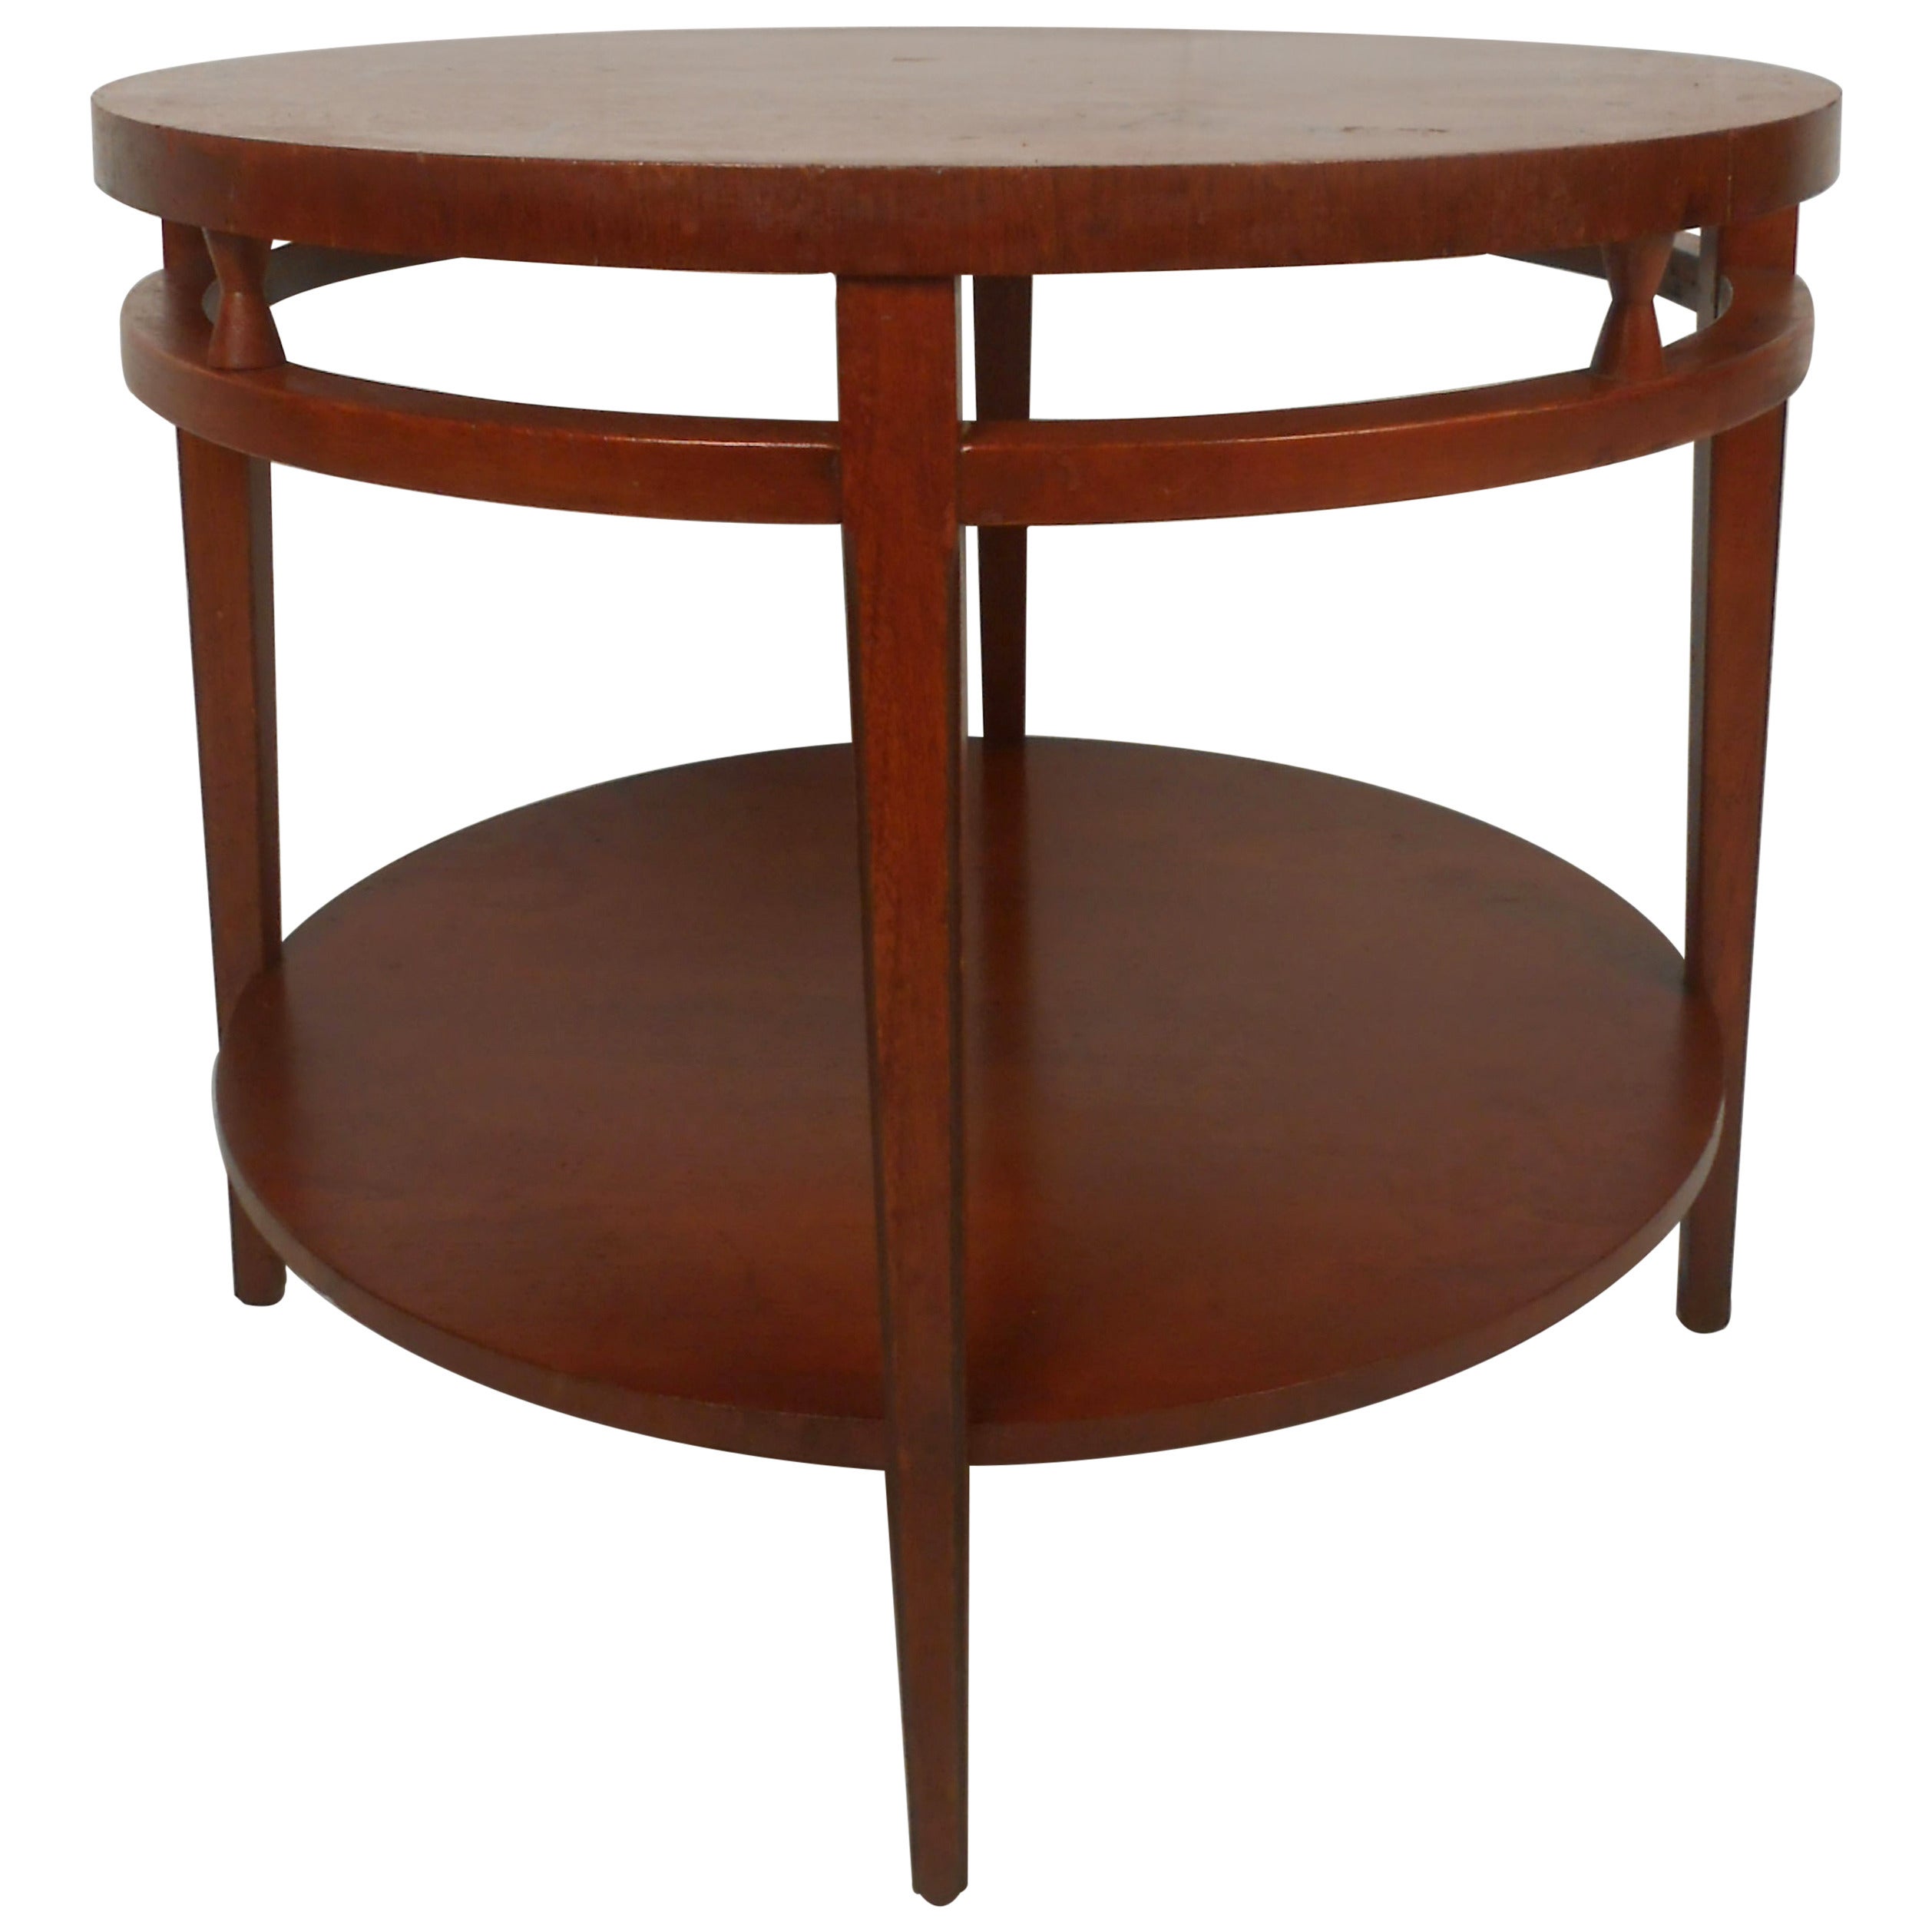 Midcentury Two-Tier Round Coffee Table